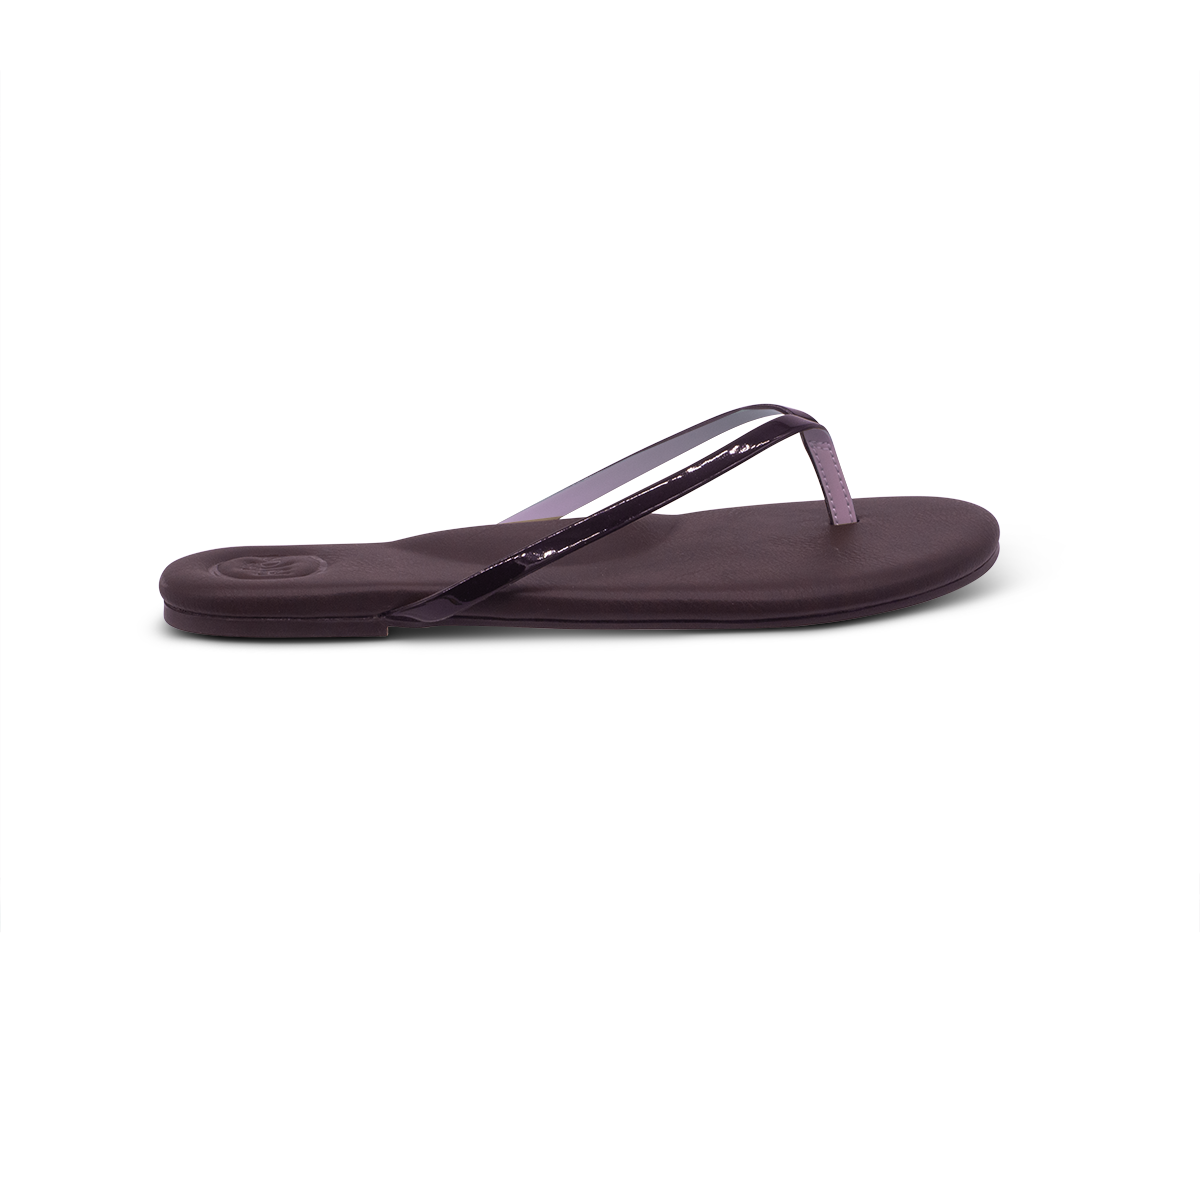 Solei Sea Indie Sandal in Cocoa w/ Pink